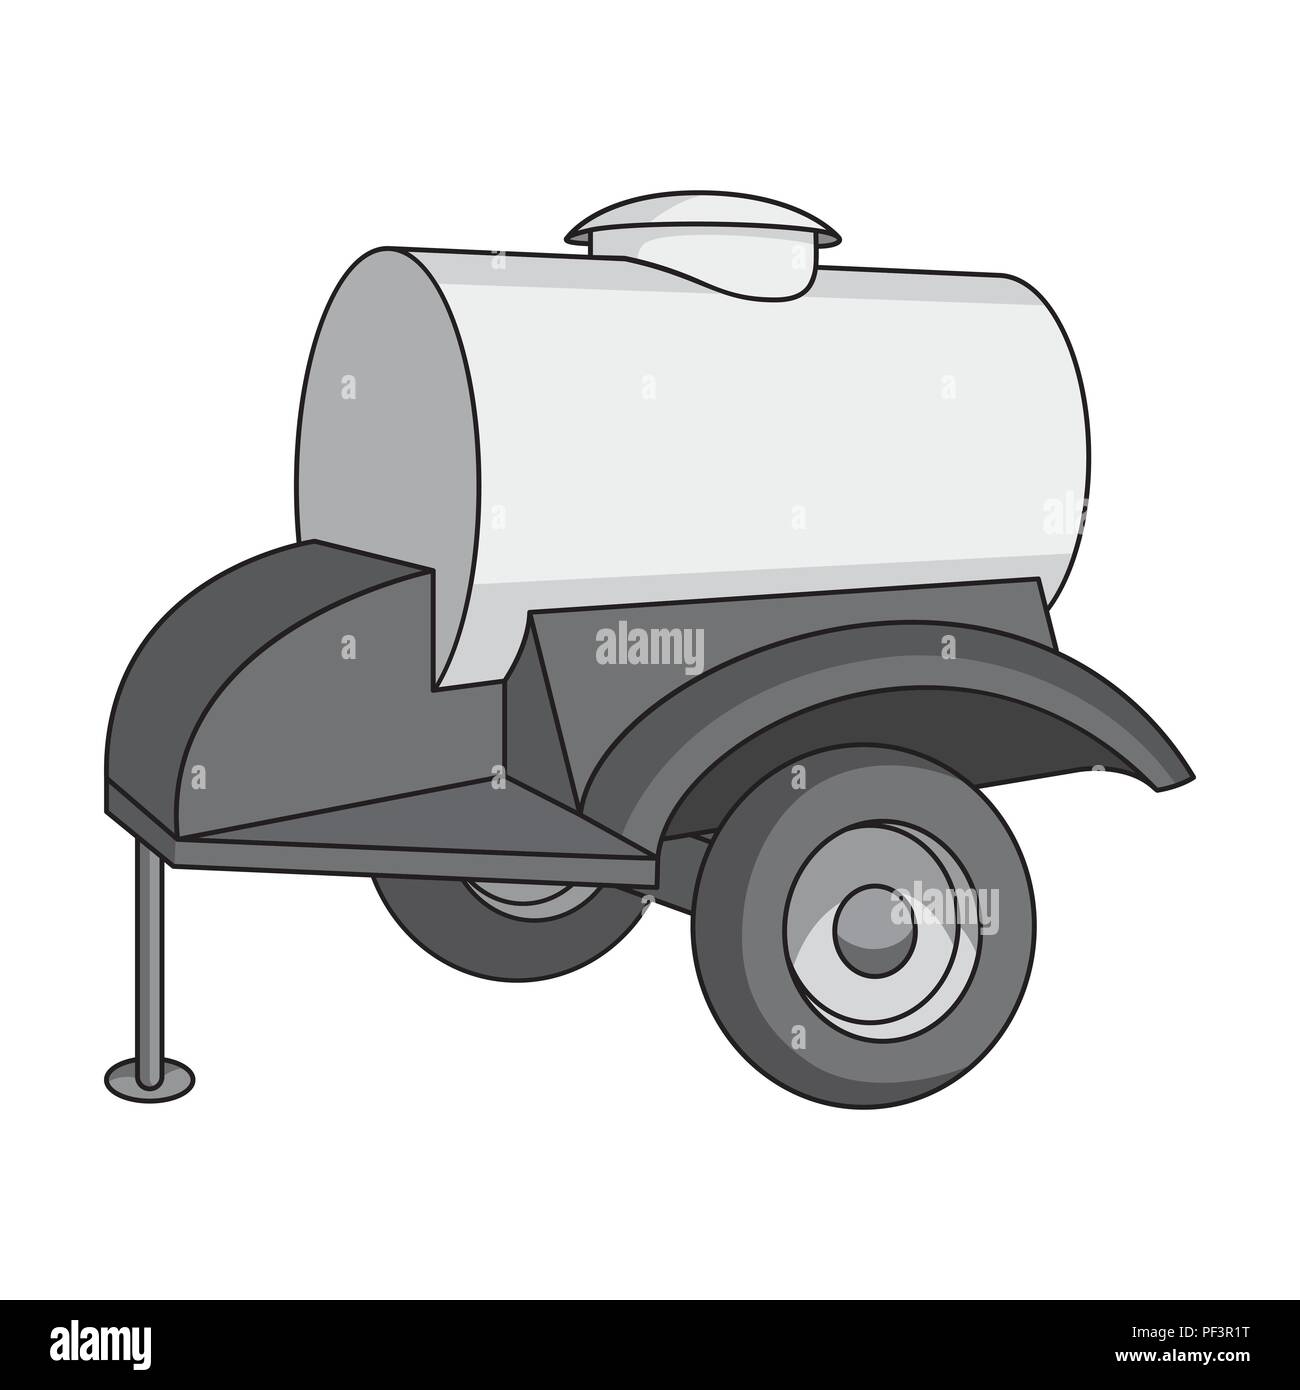 agricultura,automobile,barrel,black,business,car,cargo,cistern,container,delivery,design,freight,fuel,gas,heavy,icon,illustration,industrial,isolated,l machinery,liquid,logo,long,lorry,monochrome,object,oil,plants,sign,symbol,tank,tanker,traffic,trailer,transport,transportation,truck,vector,vehicle,watering,web,wheel,wheels,yellow Vector Vectors , Stock Vector